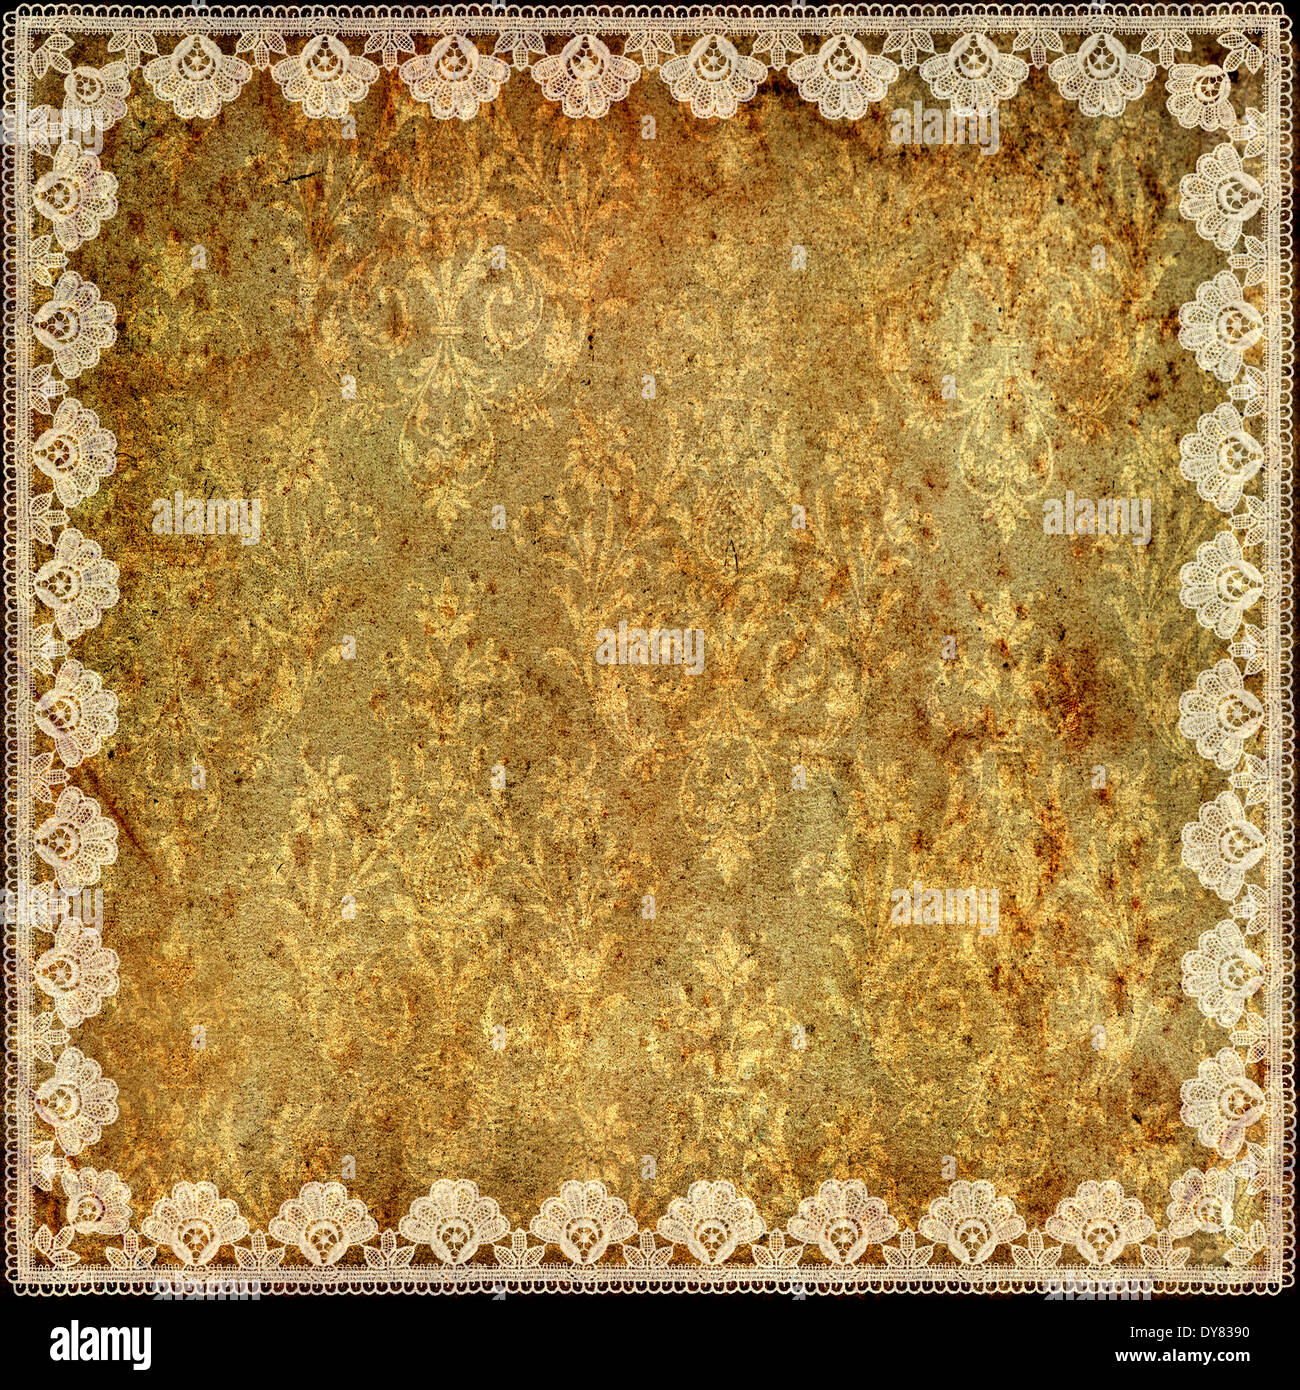 Antique Paper With Floral Border 19th Century High-Res Vector Graphic -  Getty Images